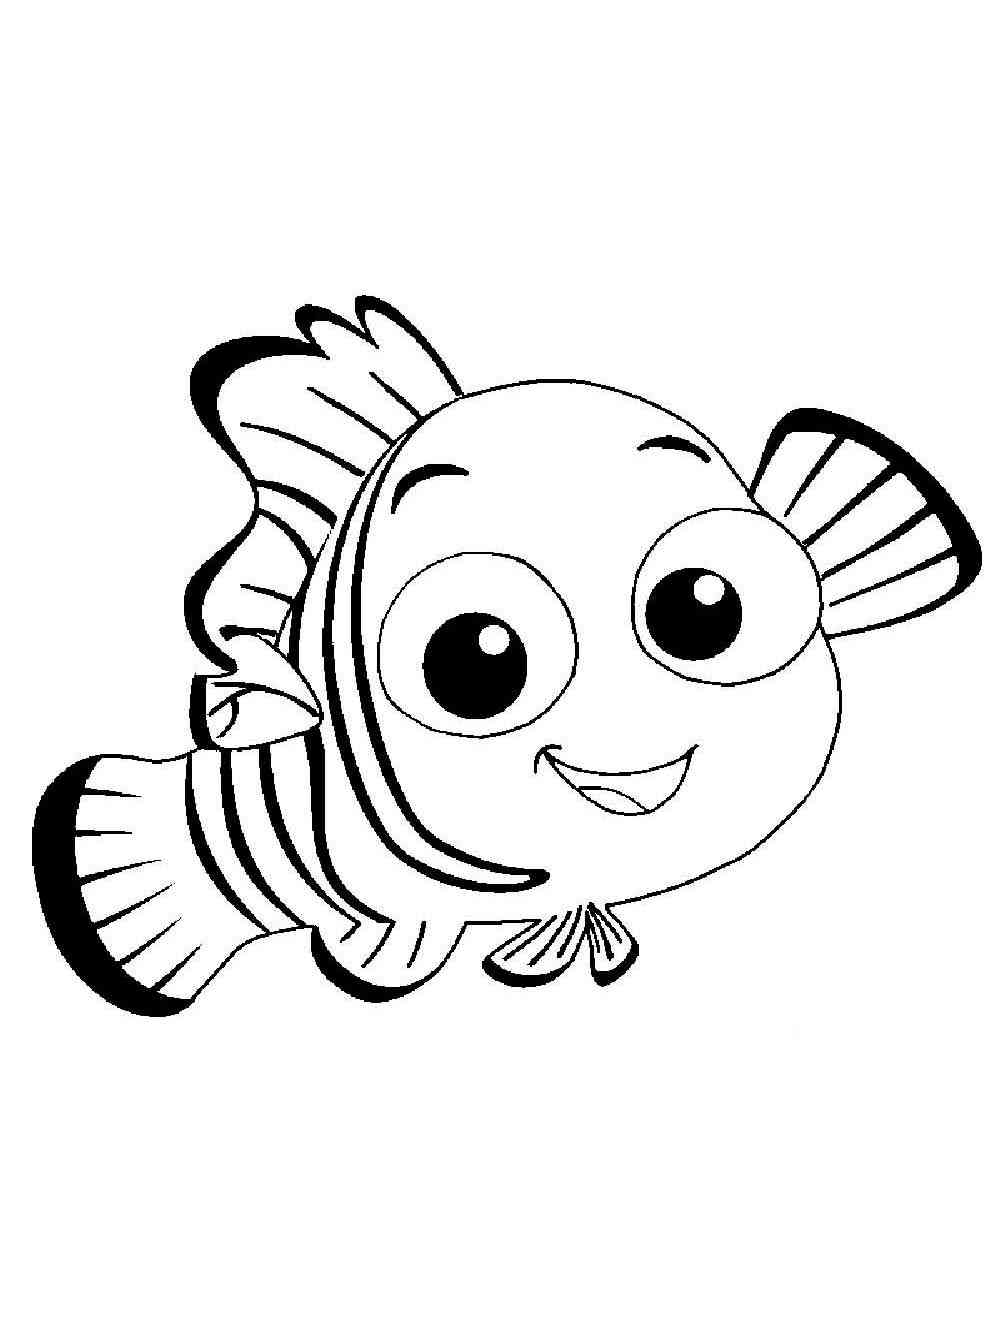 Finding Nemo 33 coloring page